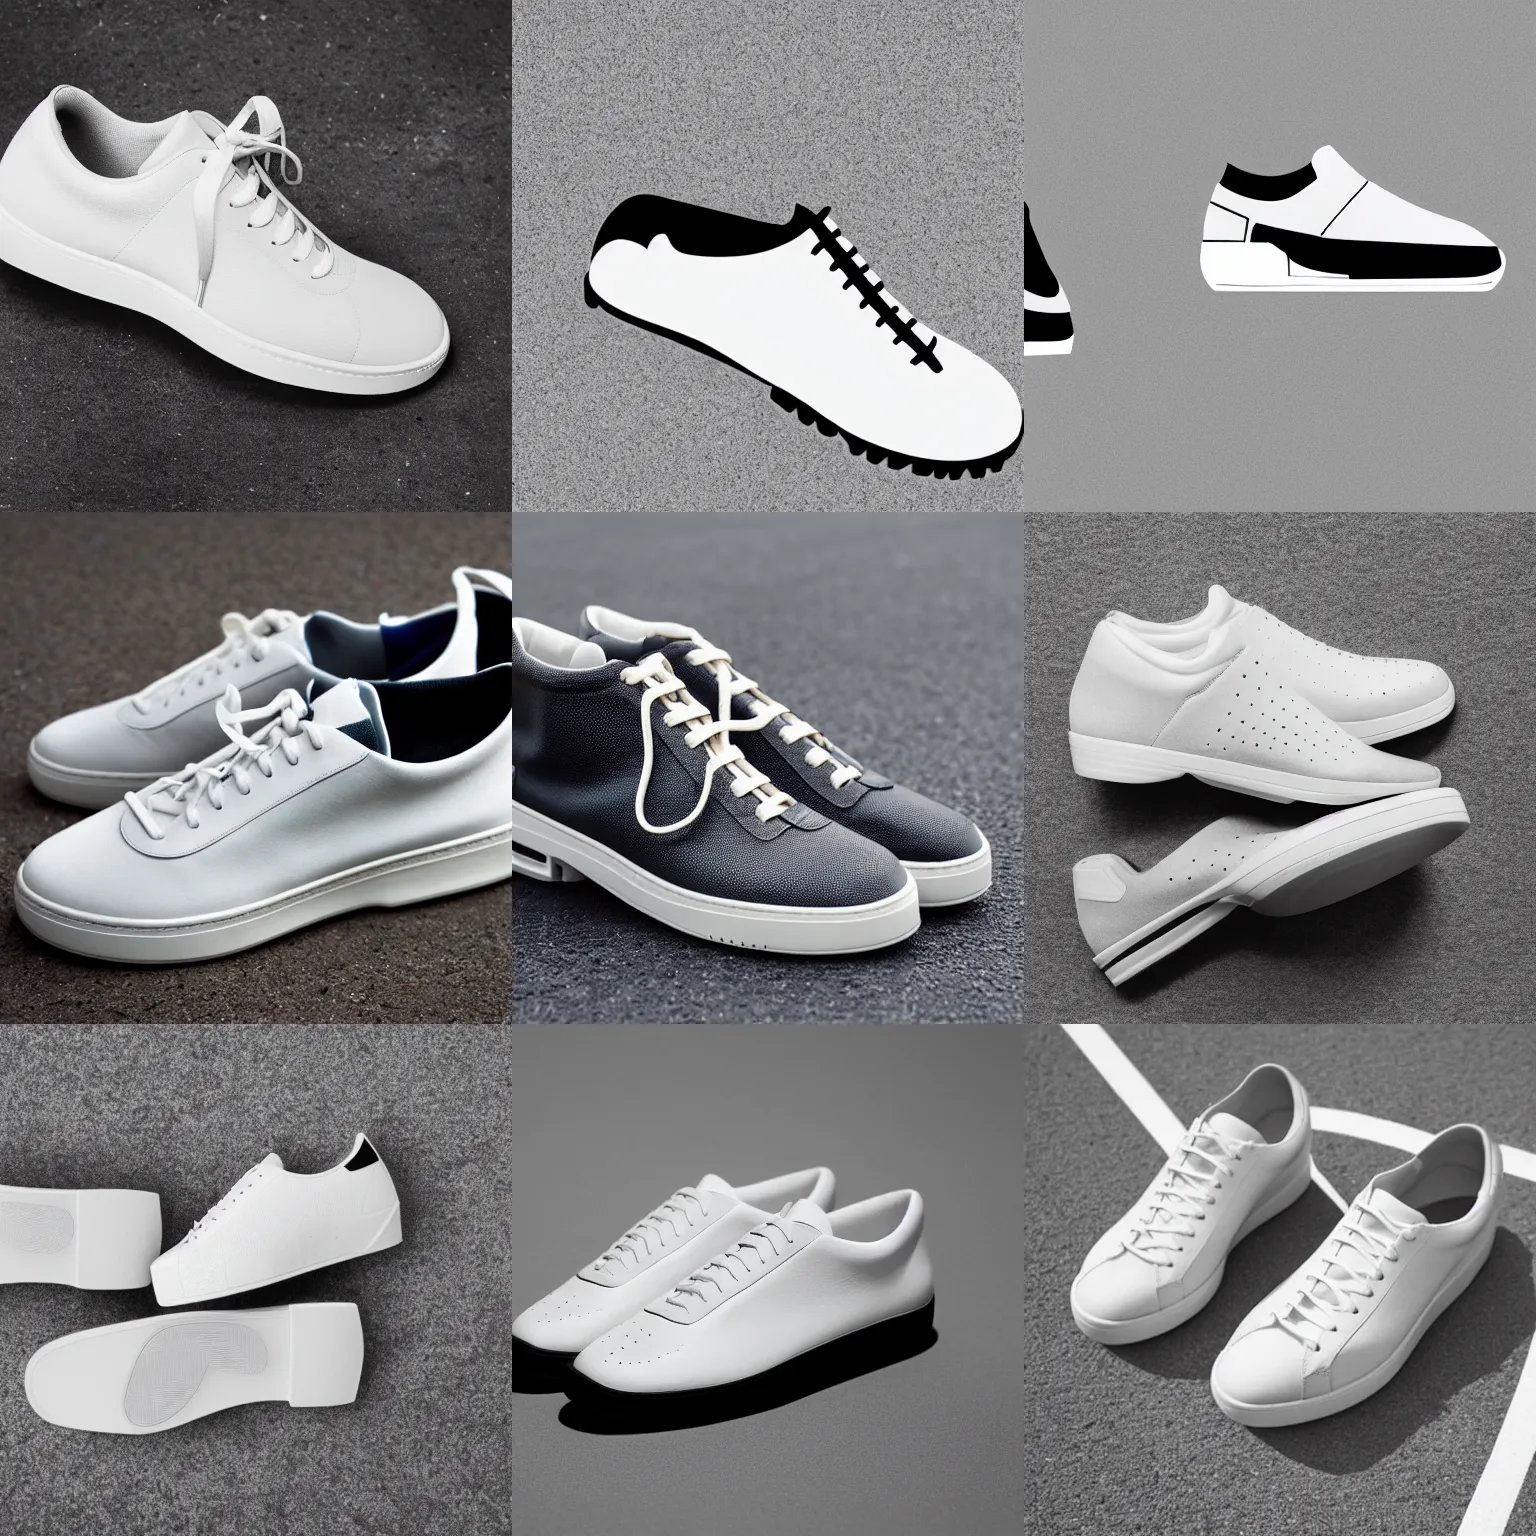 dieter rams design principles applied to a sneaker | Stable Diffusion